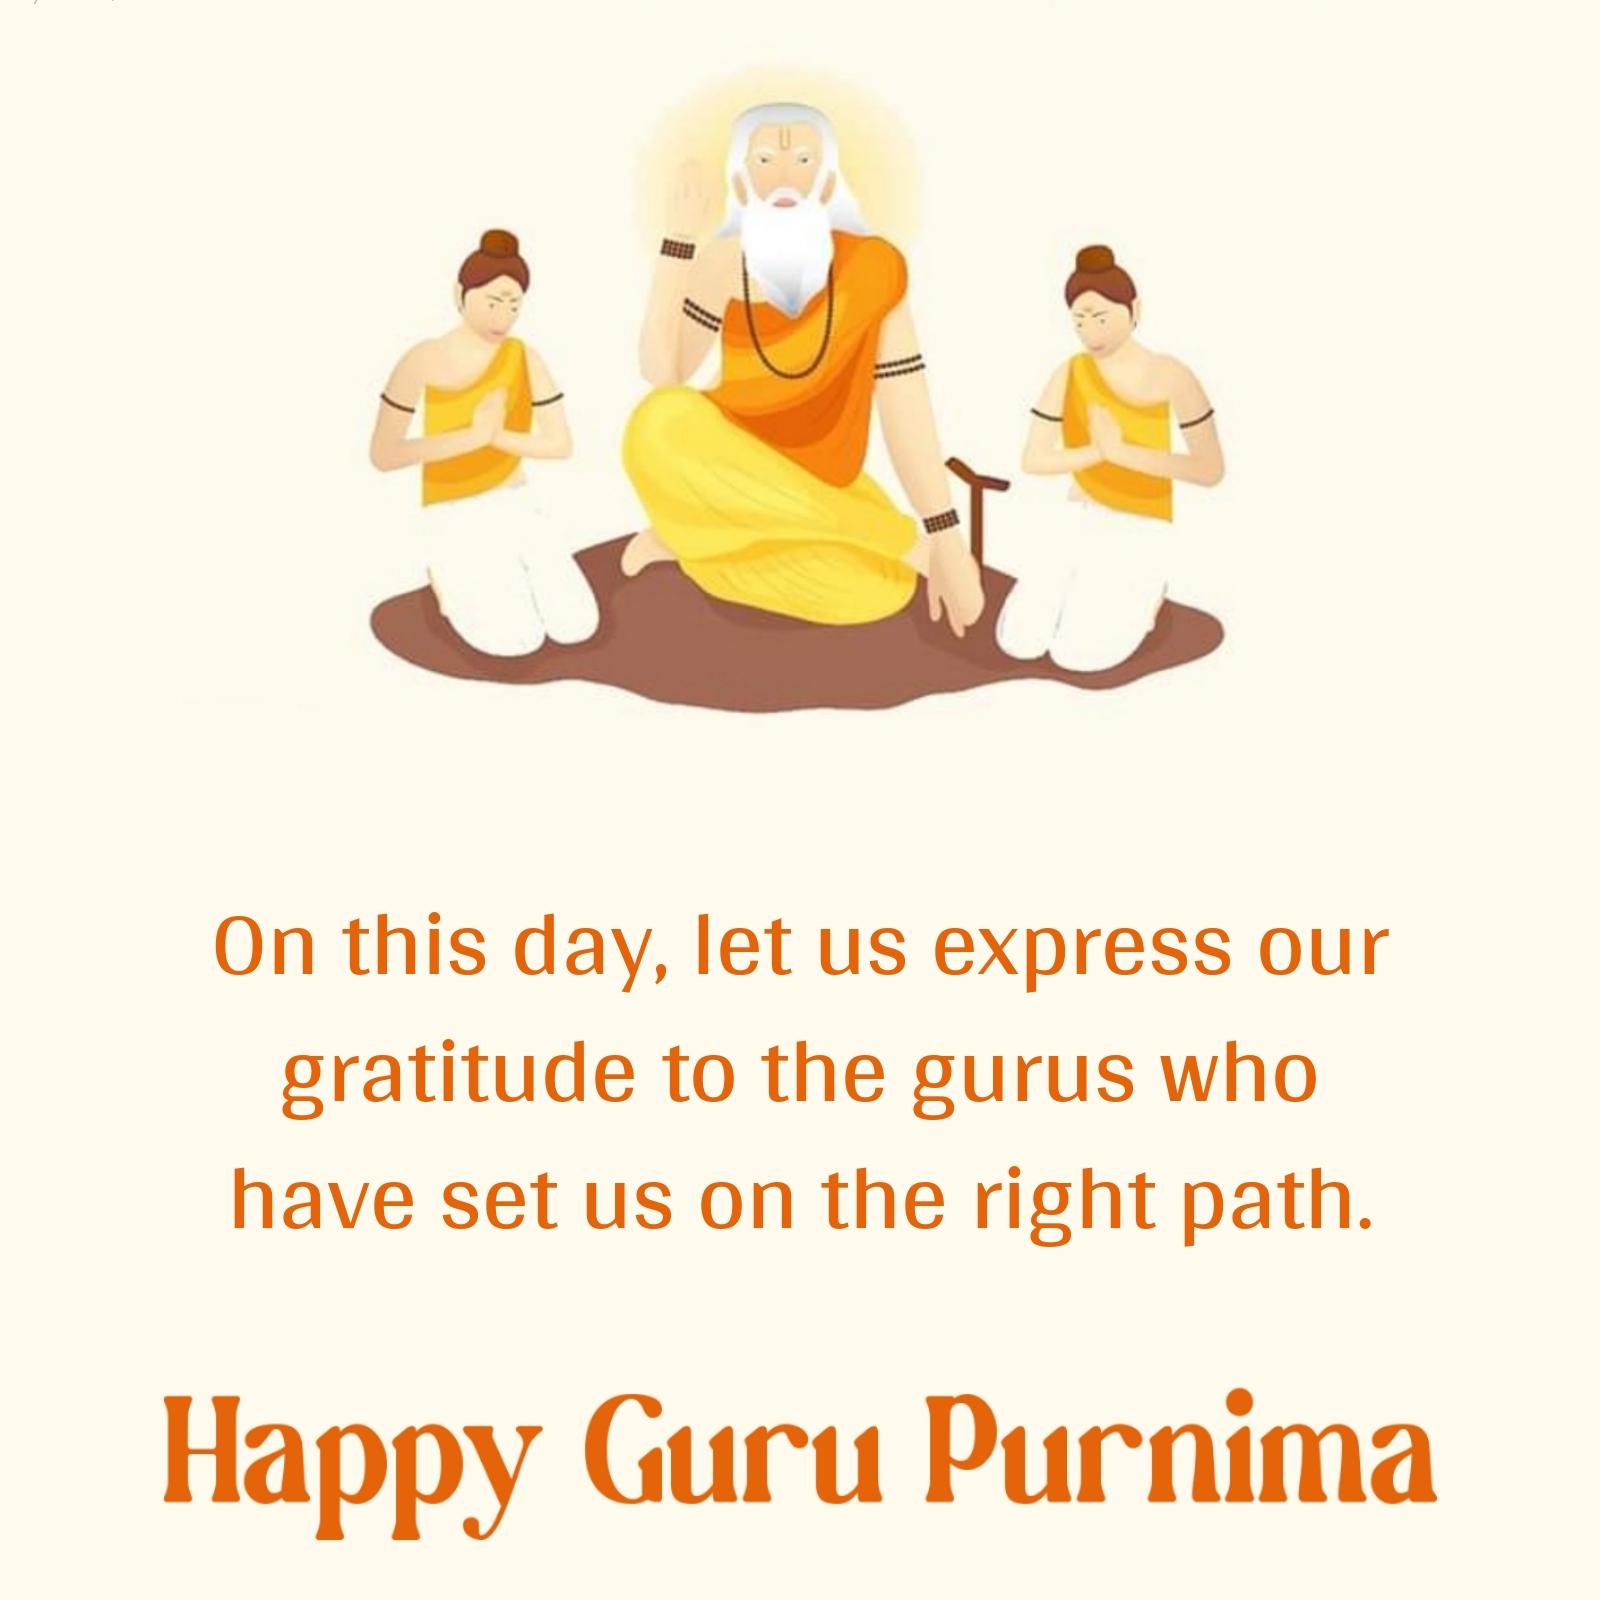 On this day let us express our gratitude to the gurus